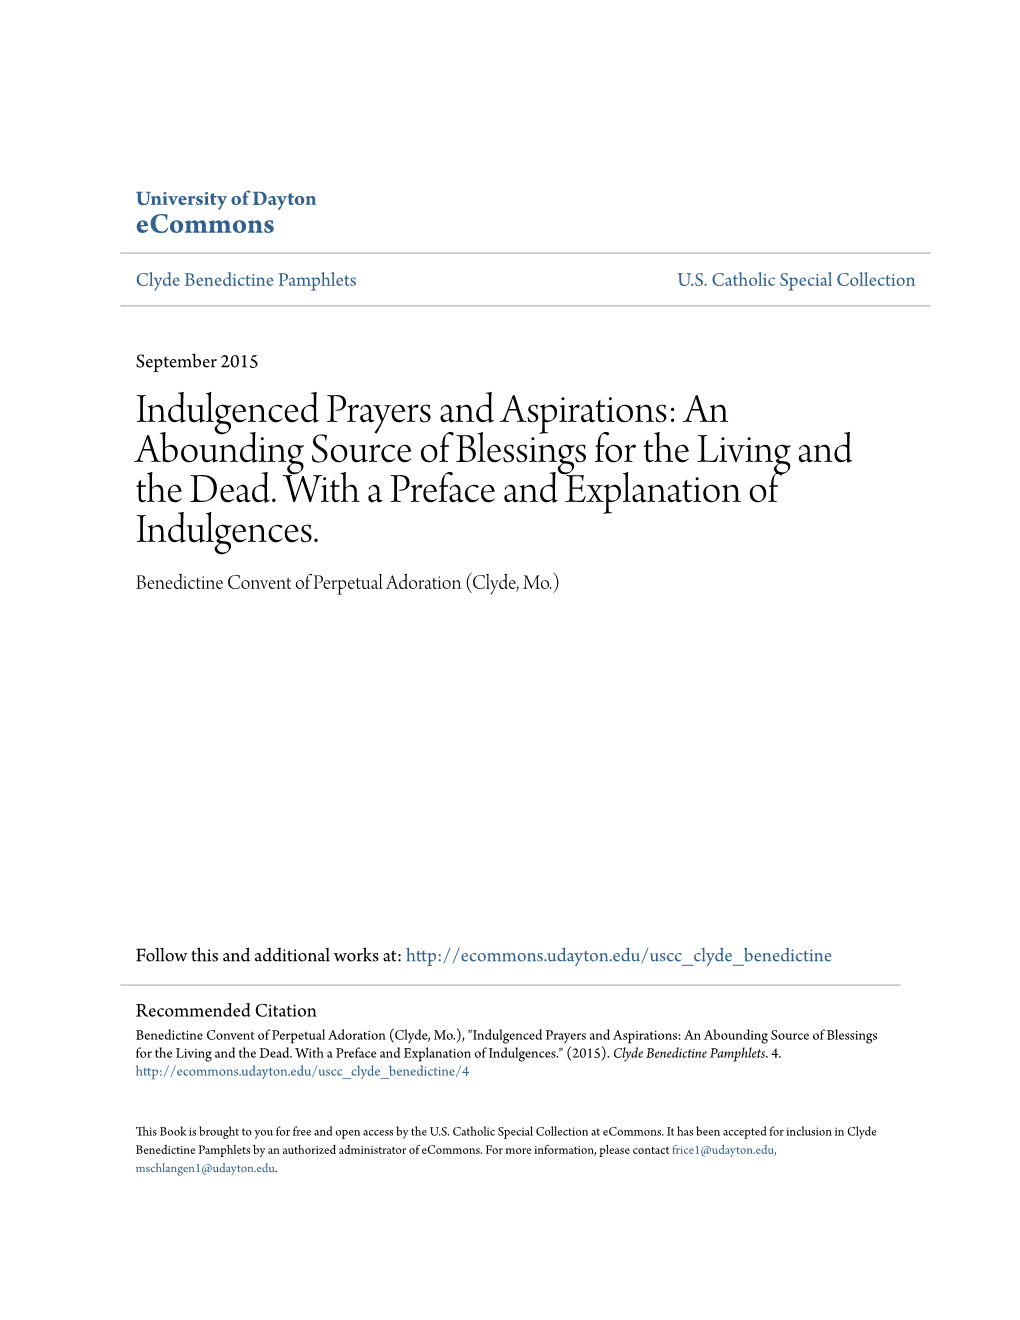 Indulgenced Prayers and Aspirations: an Abounding Source of Blessings for the Living and the Dead